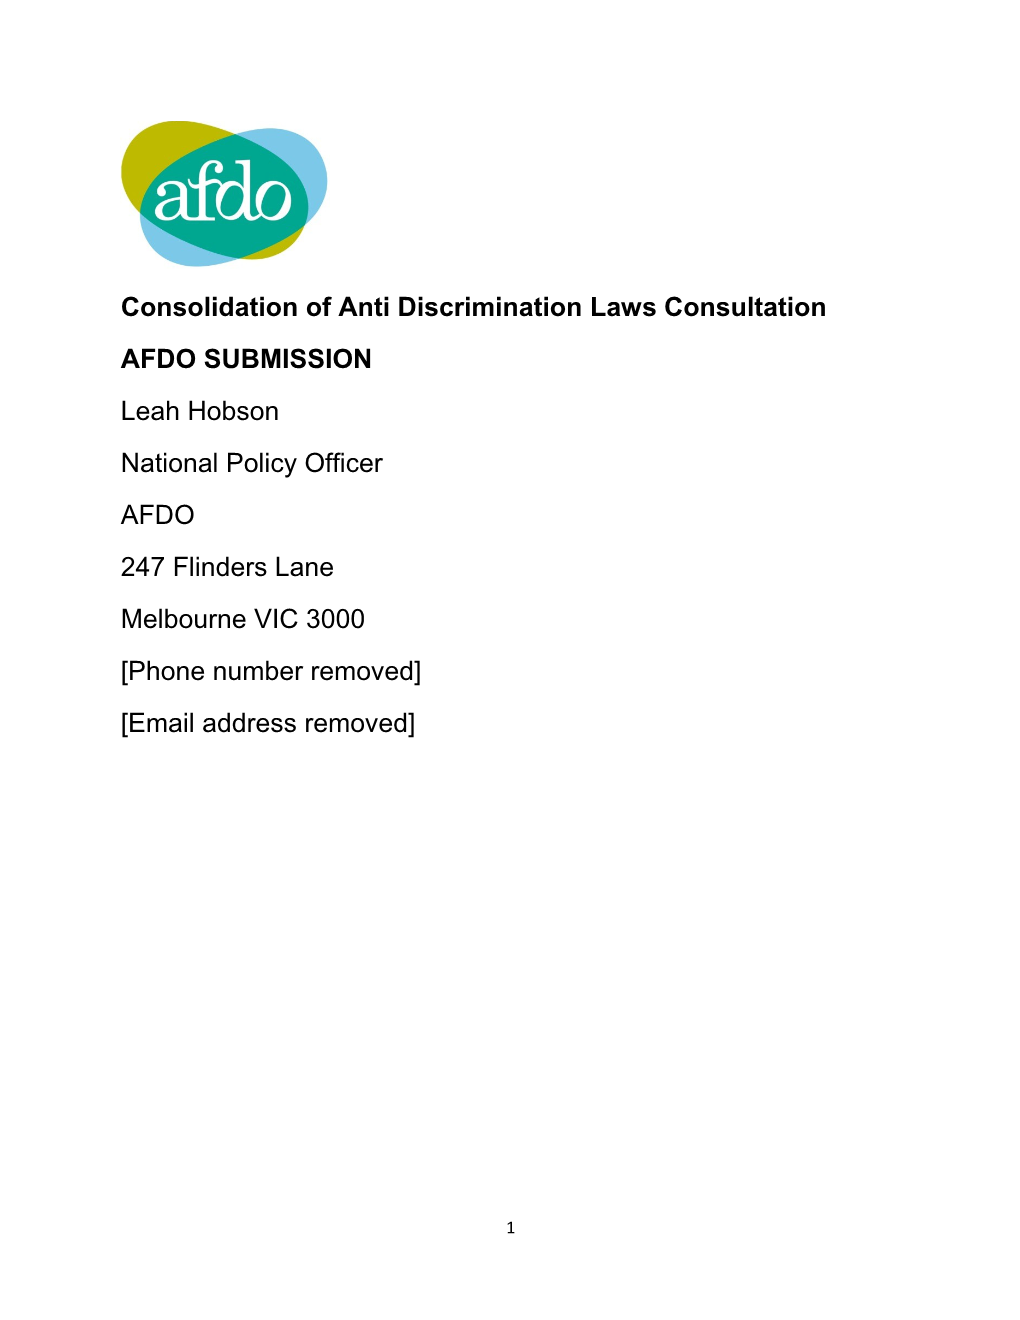 Submission on the Consolidation of Commonwealth Anti-Discrimination Laws - Aus Federation